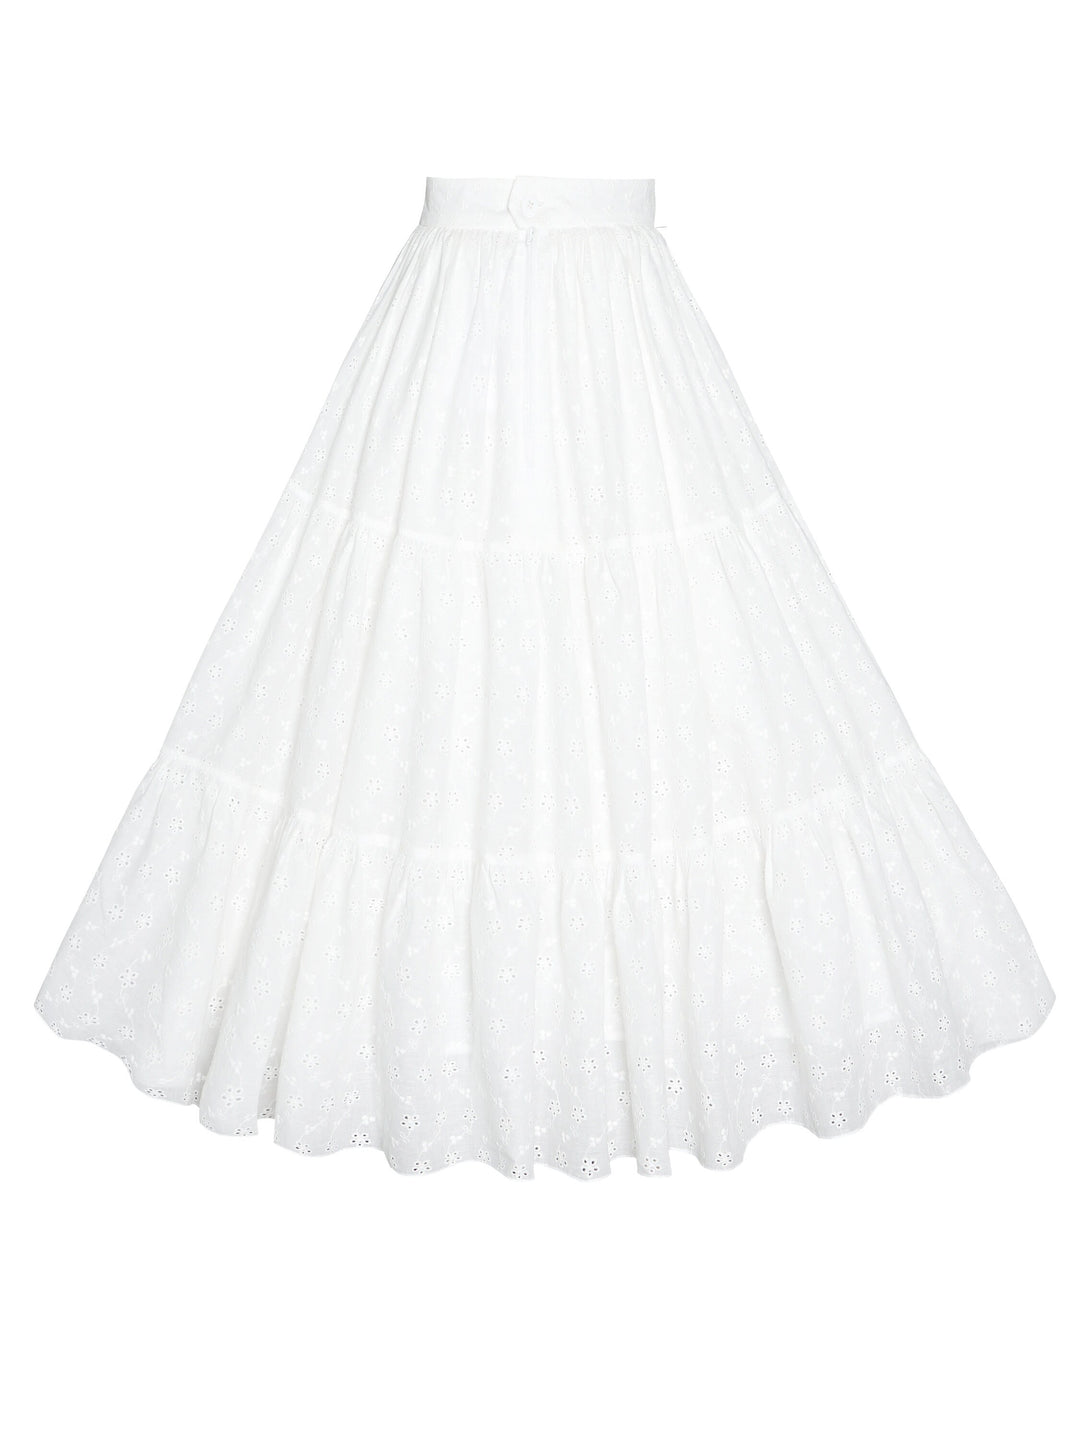 MTO - Pippa Skirt White "Forget Me Not" Eyelet